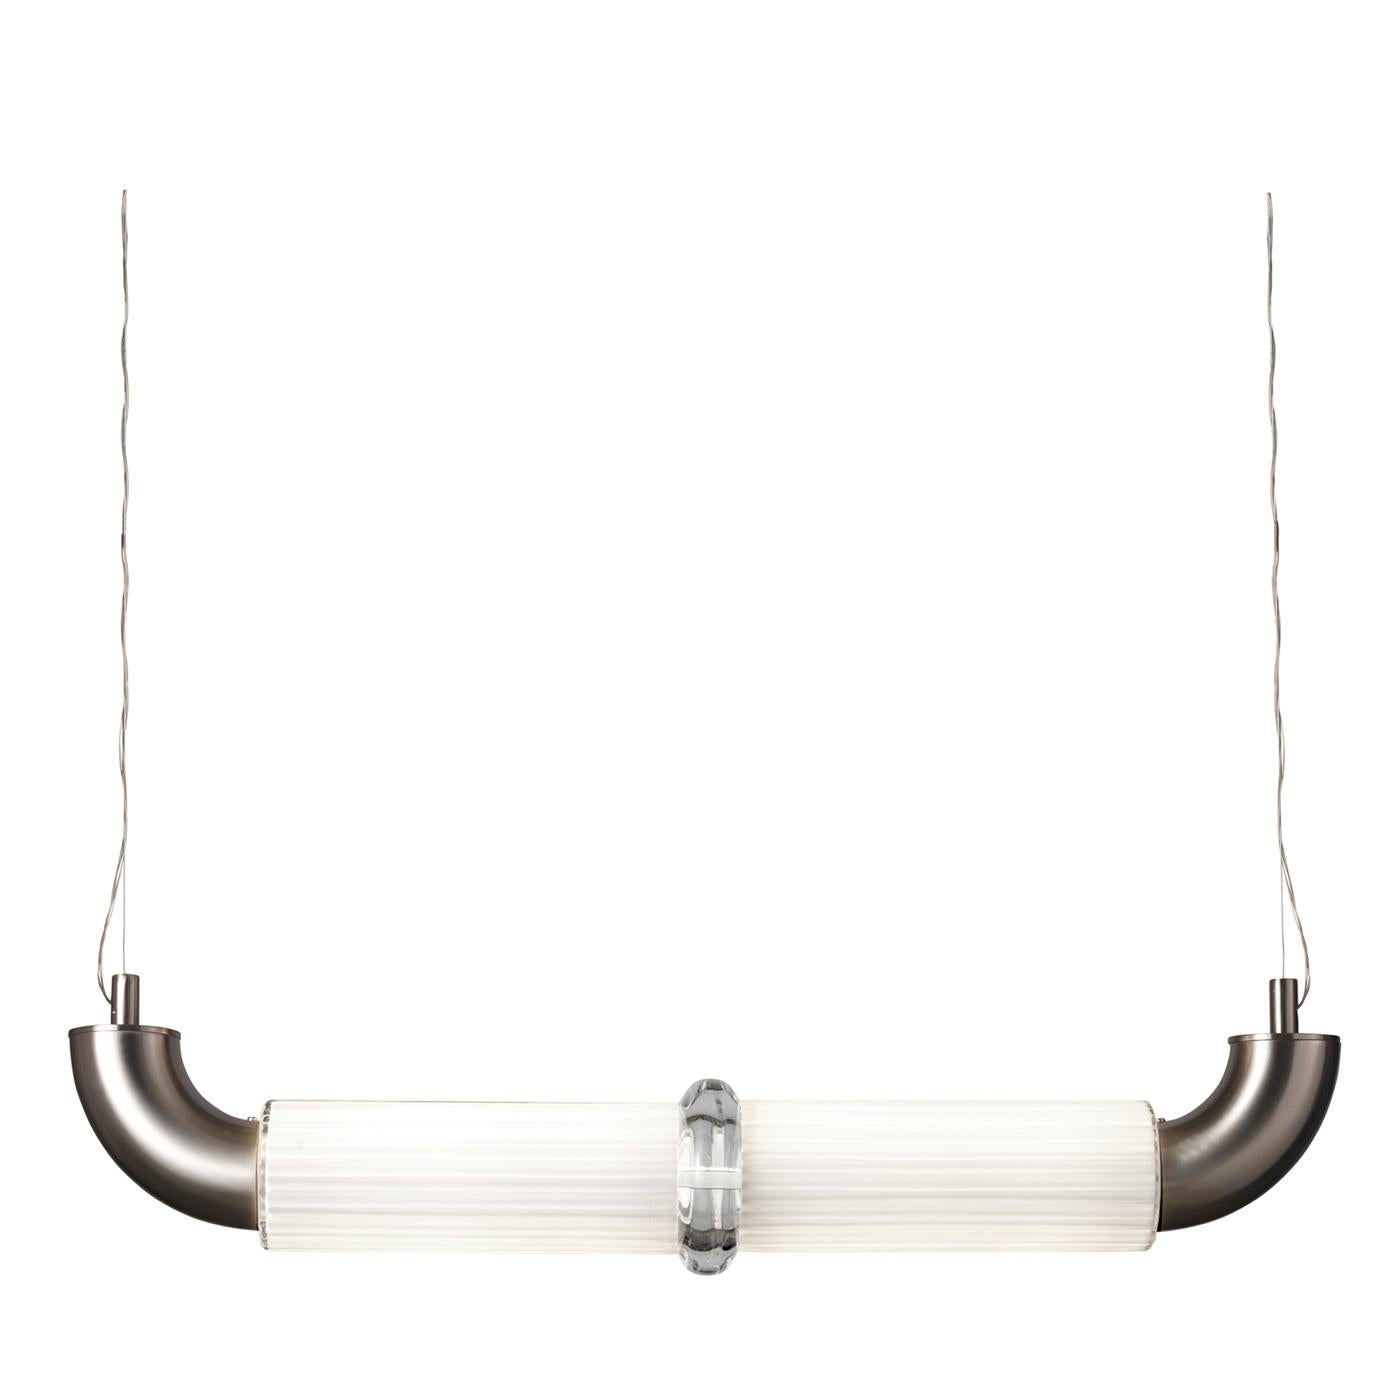 A captivating lighting piece distinguished by its essential silhouette, this pendant lamp hangs from two metal wires and showcases two curved cylindrical sections in satin nickel enclosing the horizontal diffuser in white glass that hosts a 40W LED